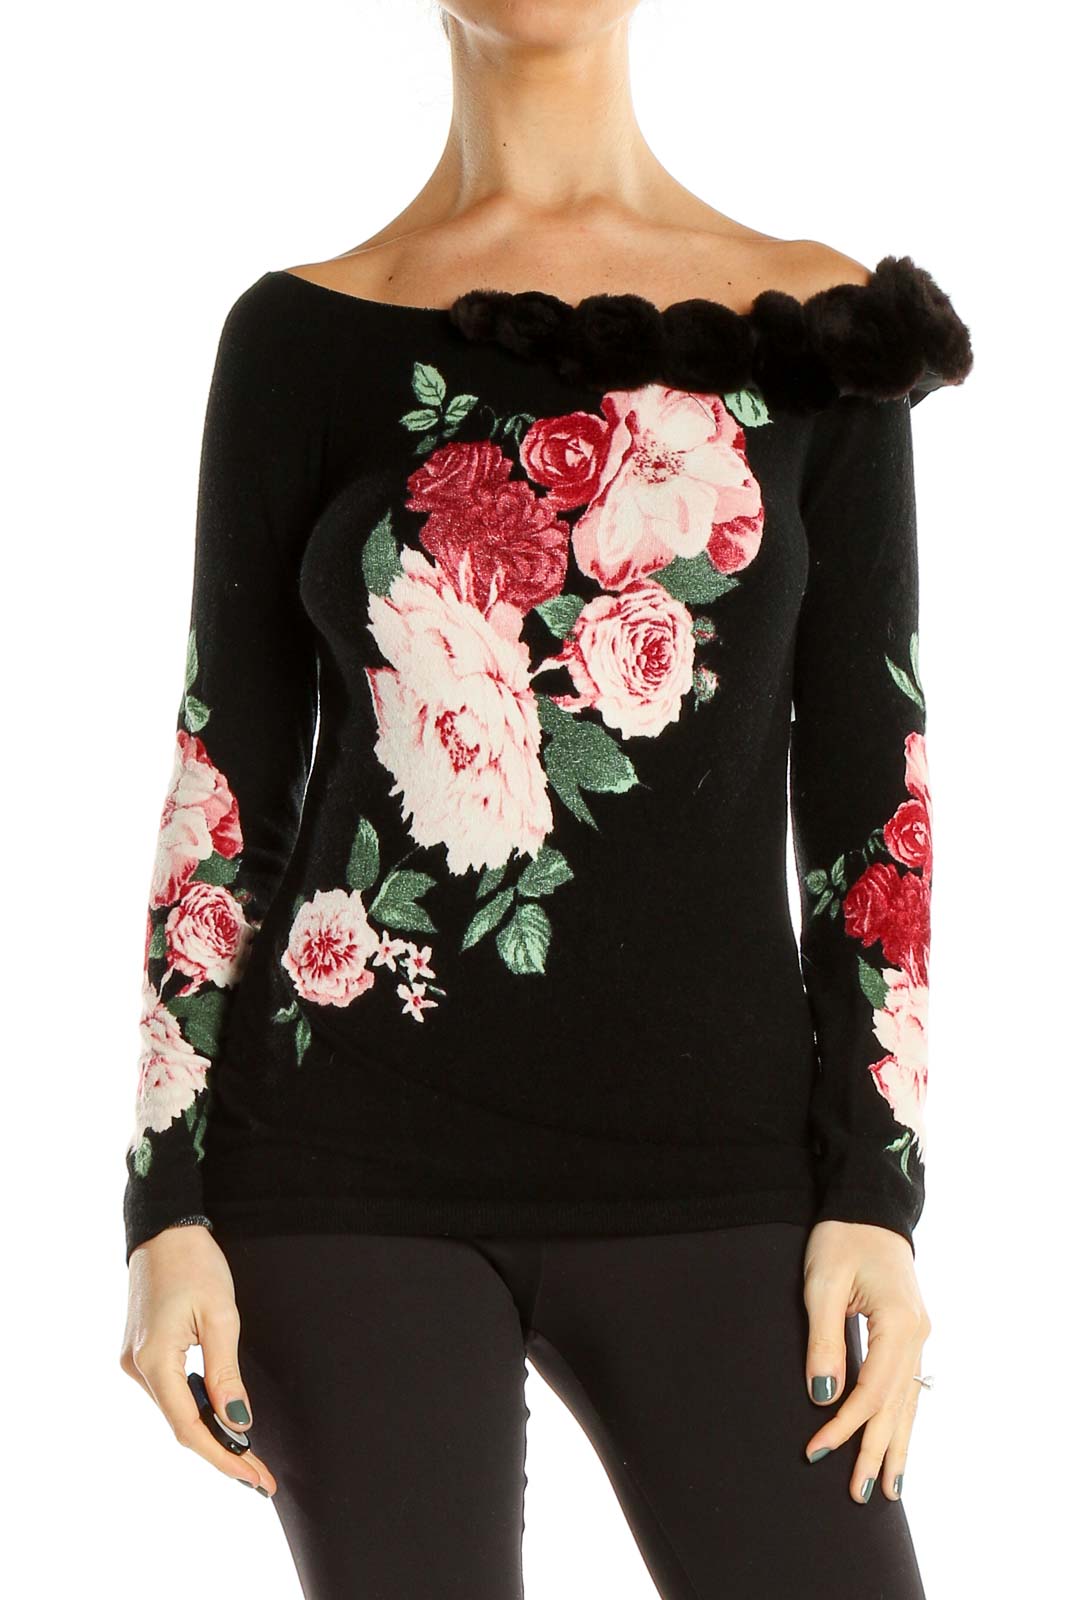 Black Floral Print Retro Funky Top Front